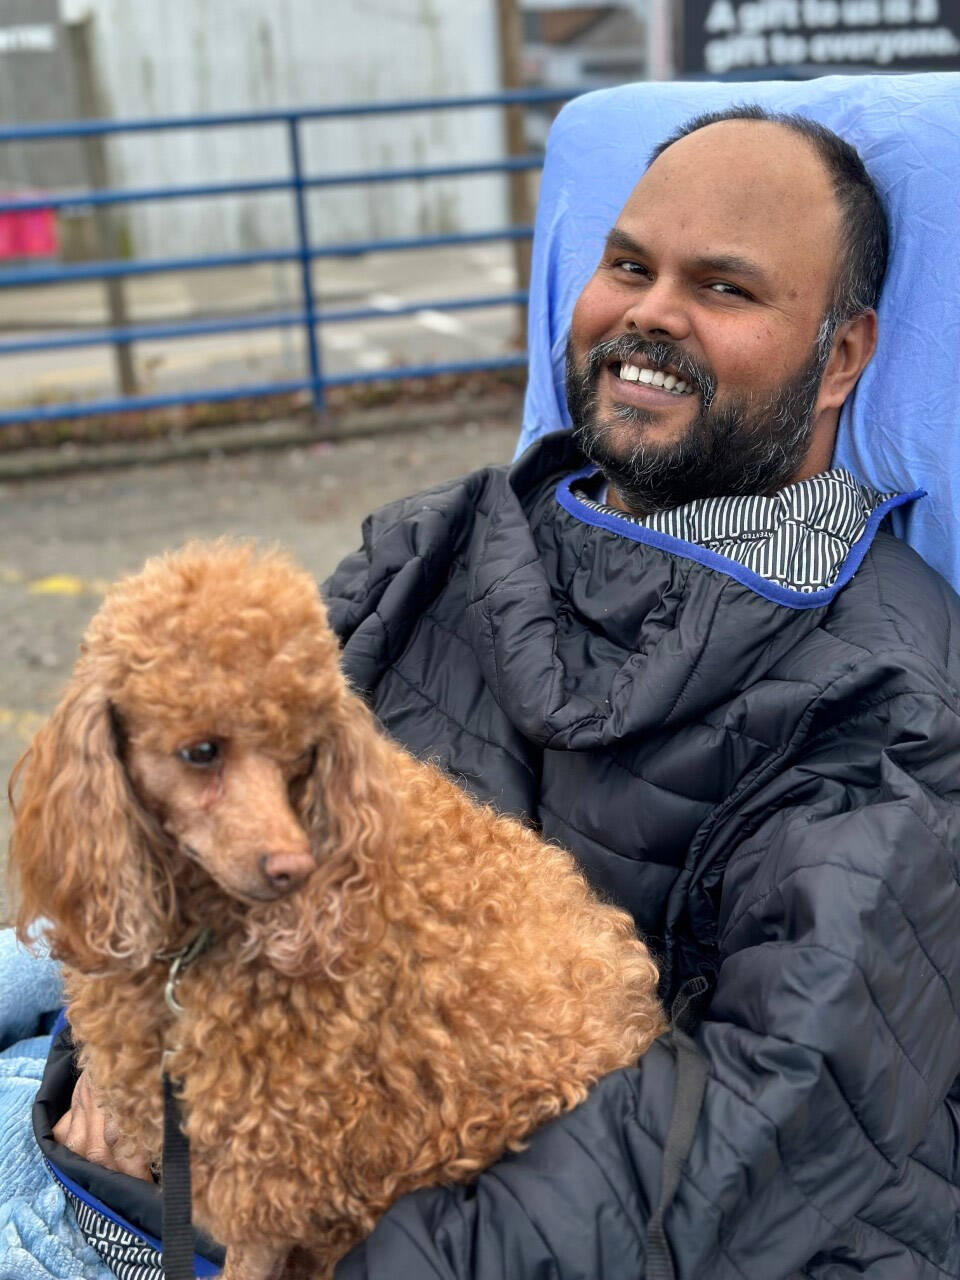 Kris Mallisetty, seen here with poodle Erica, was paralyzed from the neck down during surgery on his spine on Jan. 27. Because he doesn’t qualify for Persons With Disability funding, a friend has set up a fundraiser to help pay for the costs of making his home wheelchair-accessible. (Leah Gray photo)